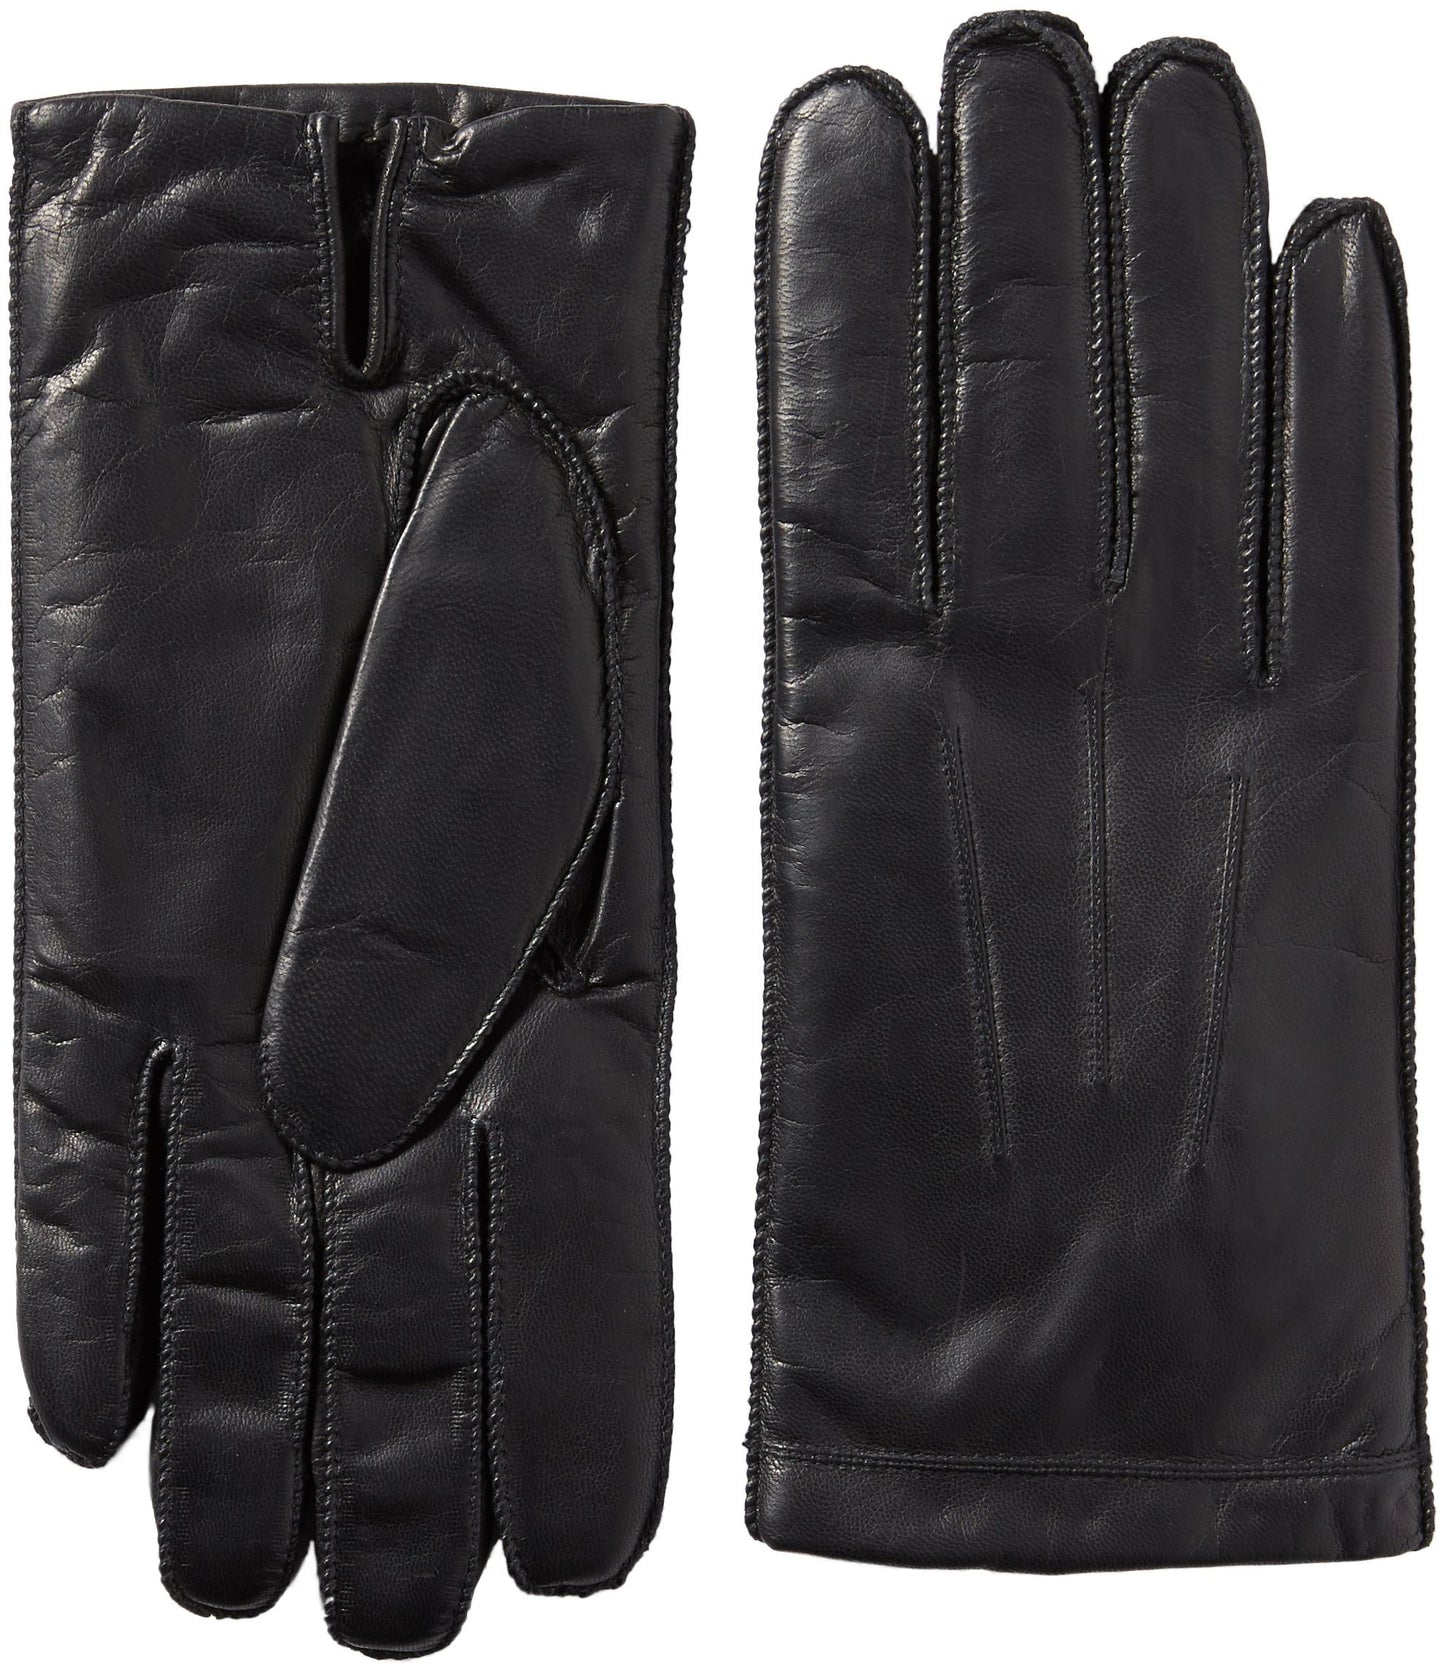 Isotoner Signature Black Smooth Leather SmarTouch Gloves - XLarge